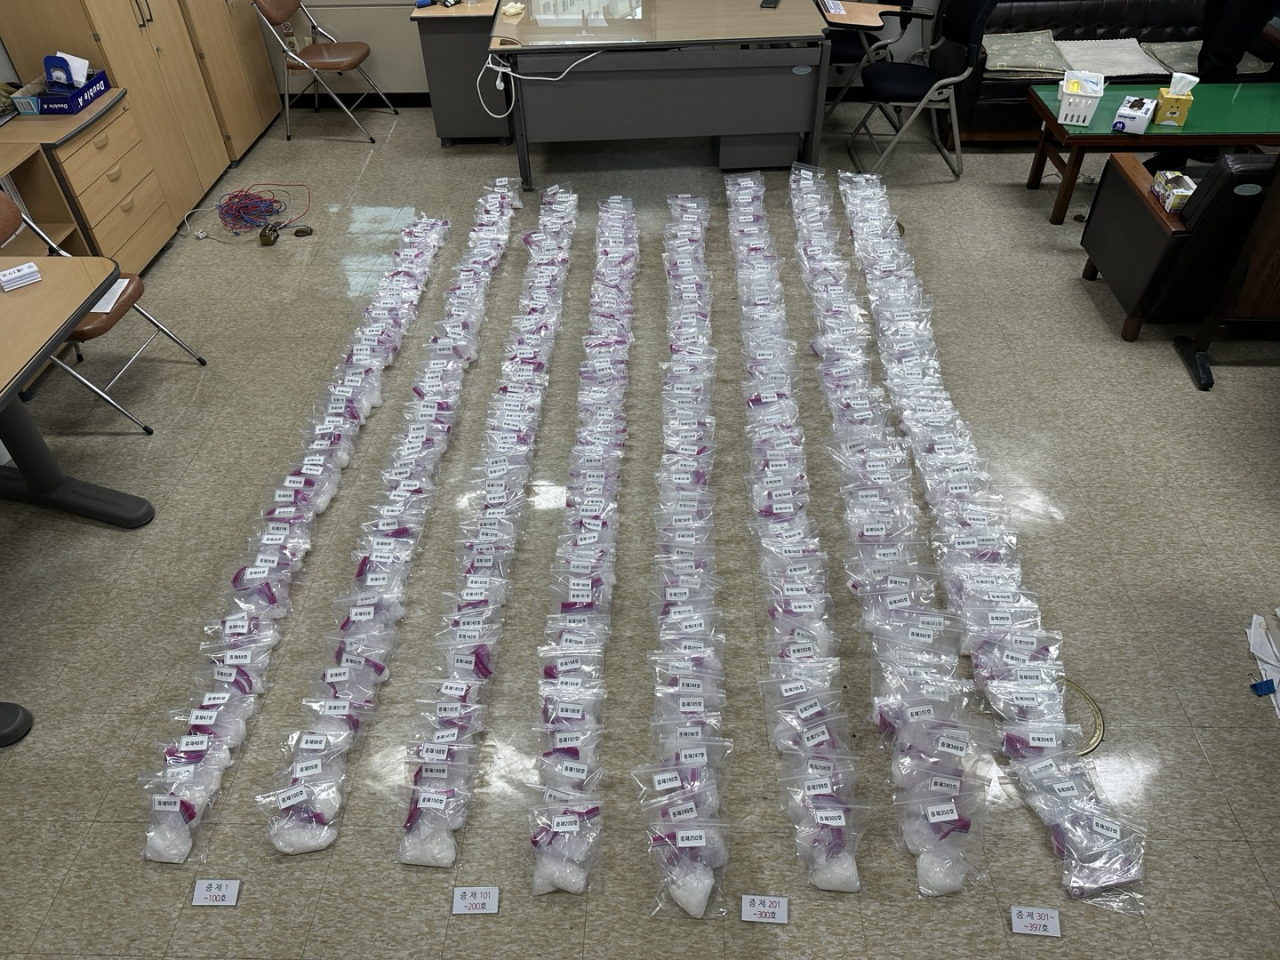 The Busan District Prosecutors Office confiscated 50 kilograms of methamphetamine worth 167 billion won ($127 million) in market value. (Busan District Prosecutors Office)